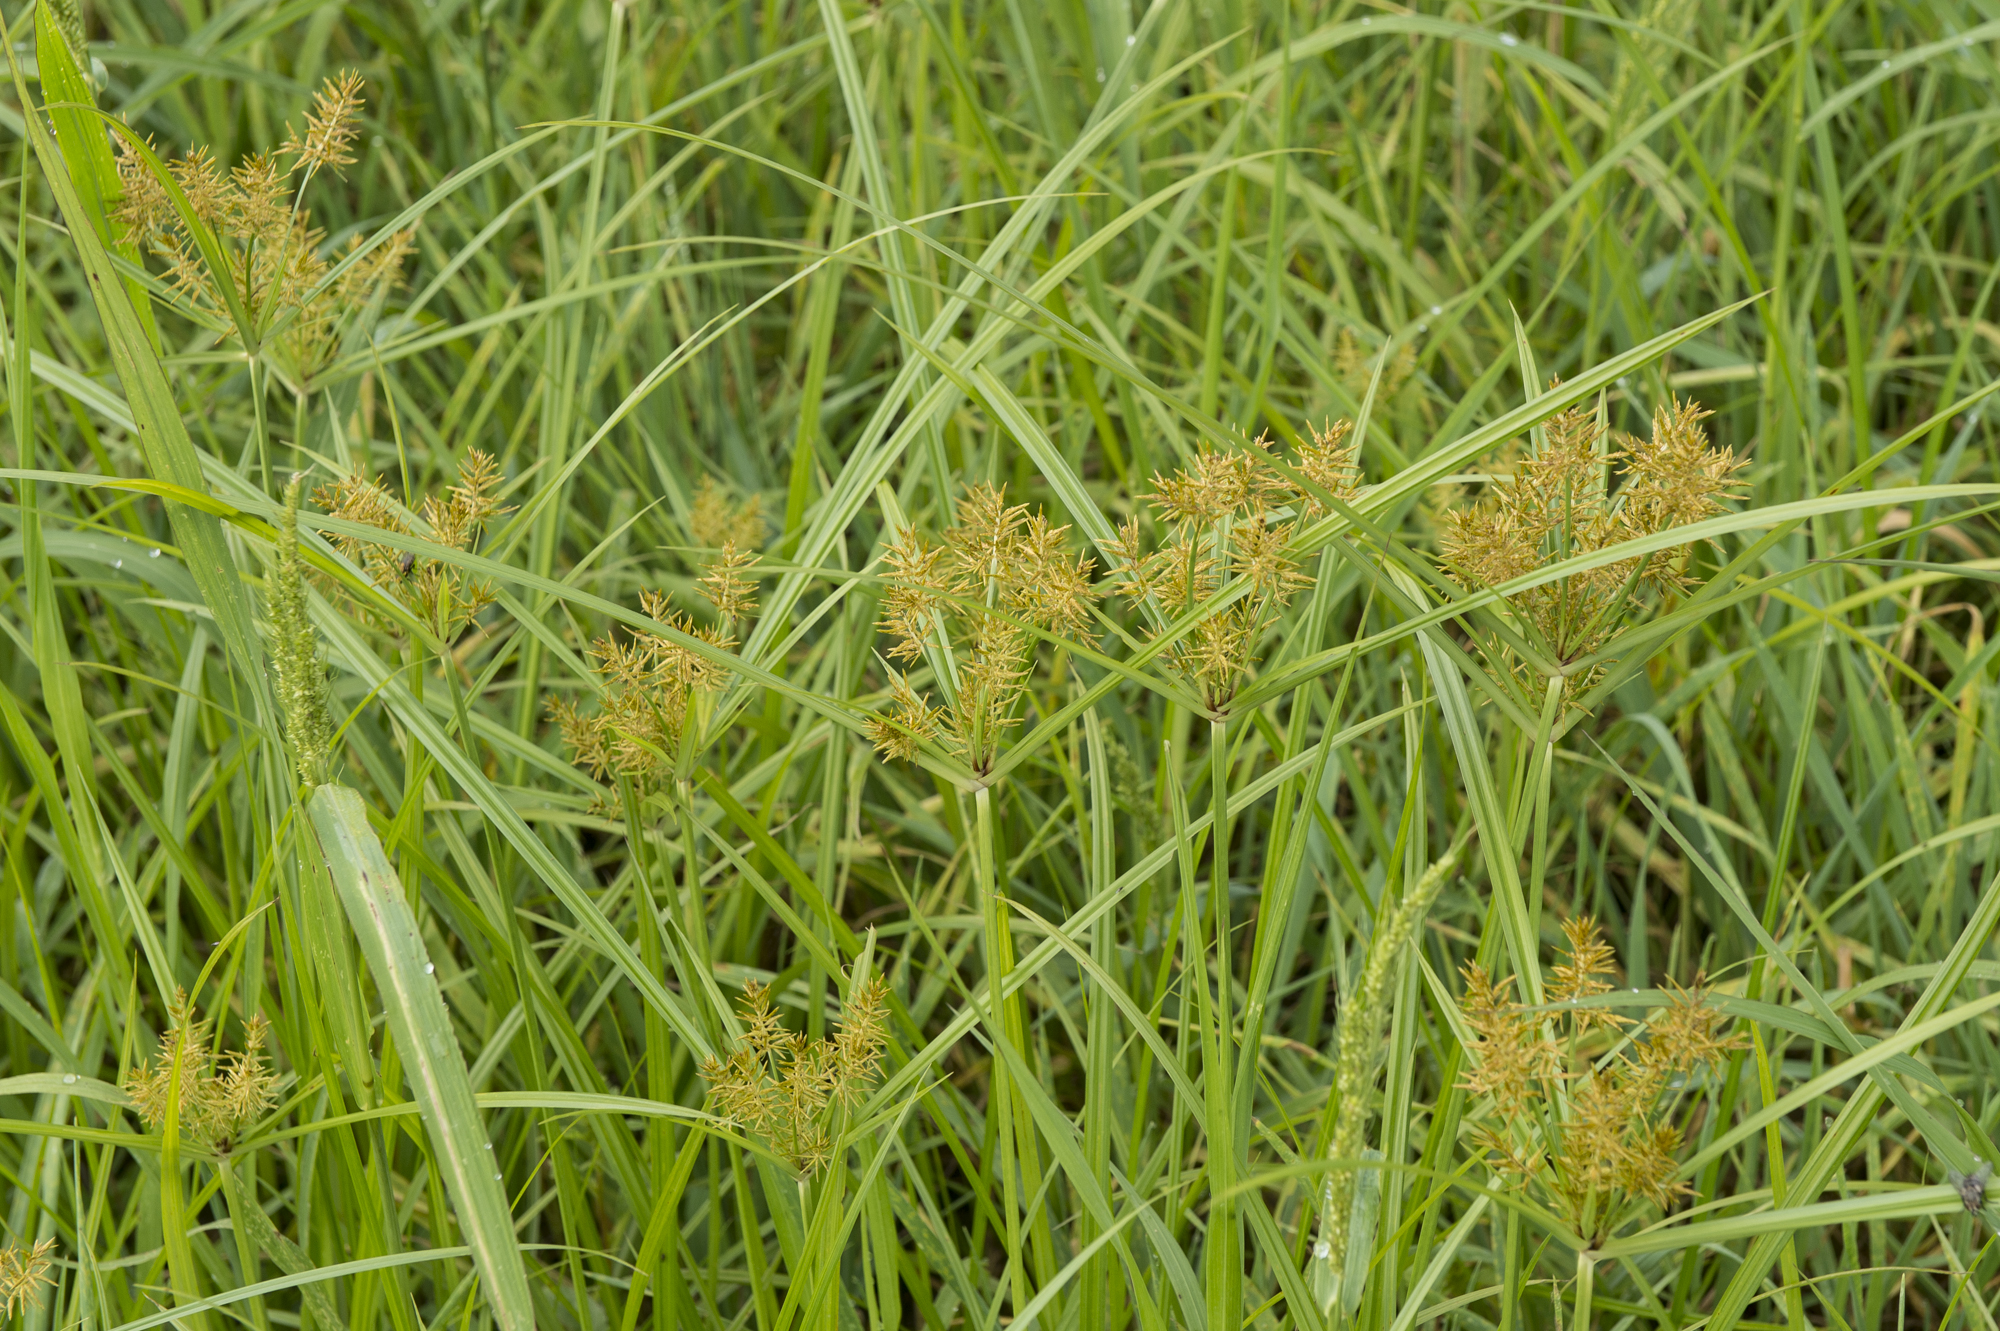 Image of Yellow nutsedge plant in a pot